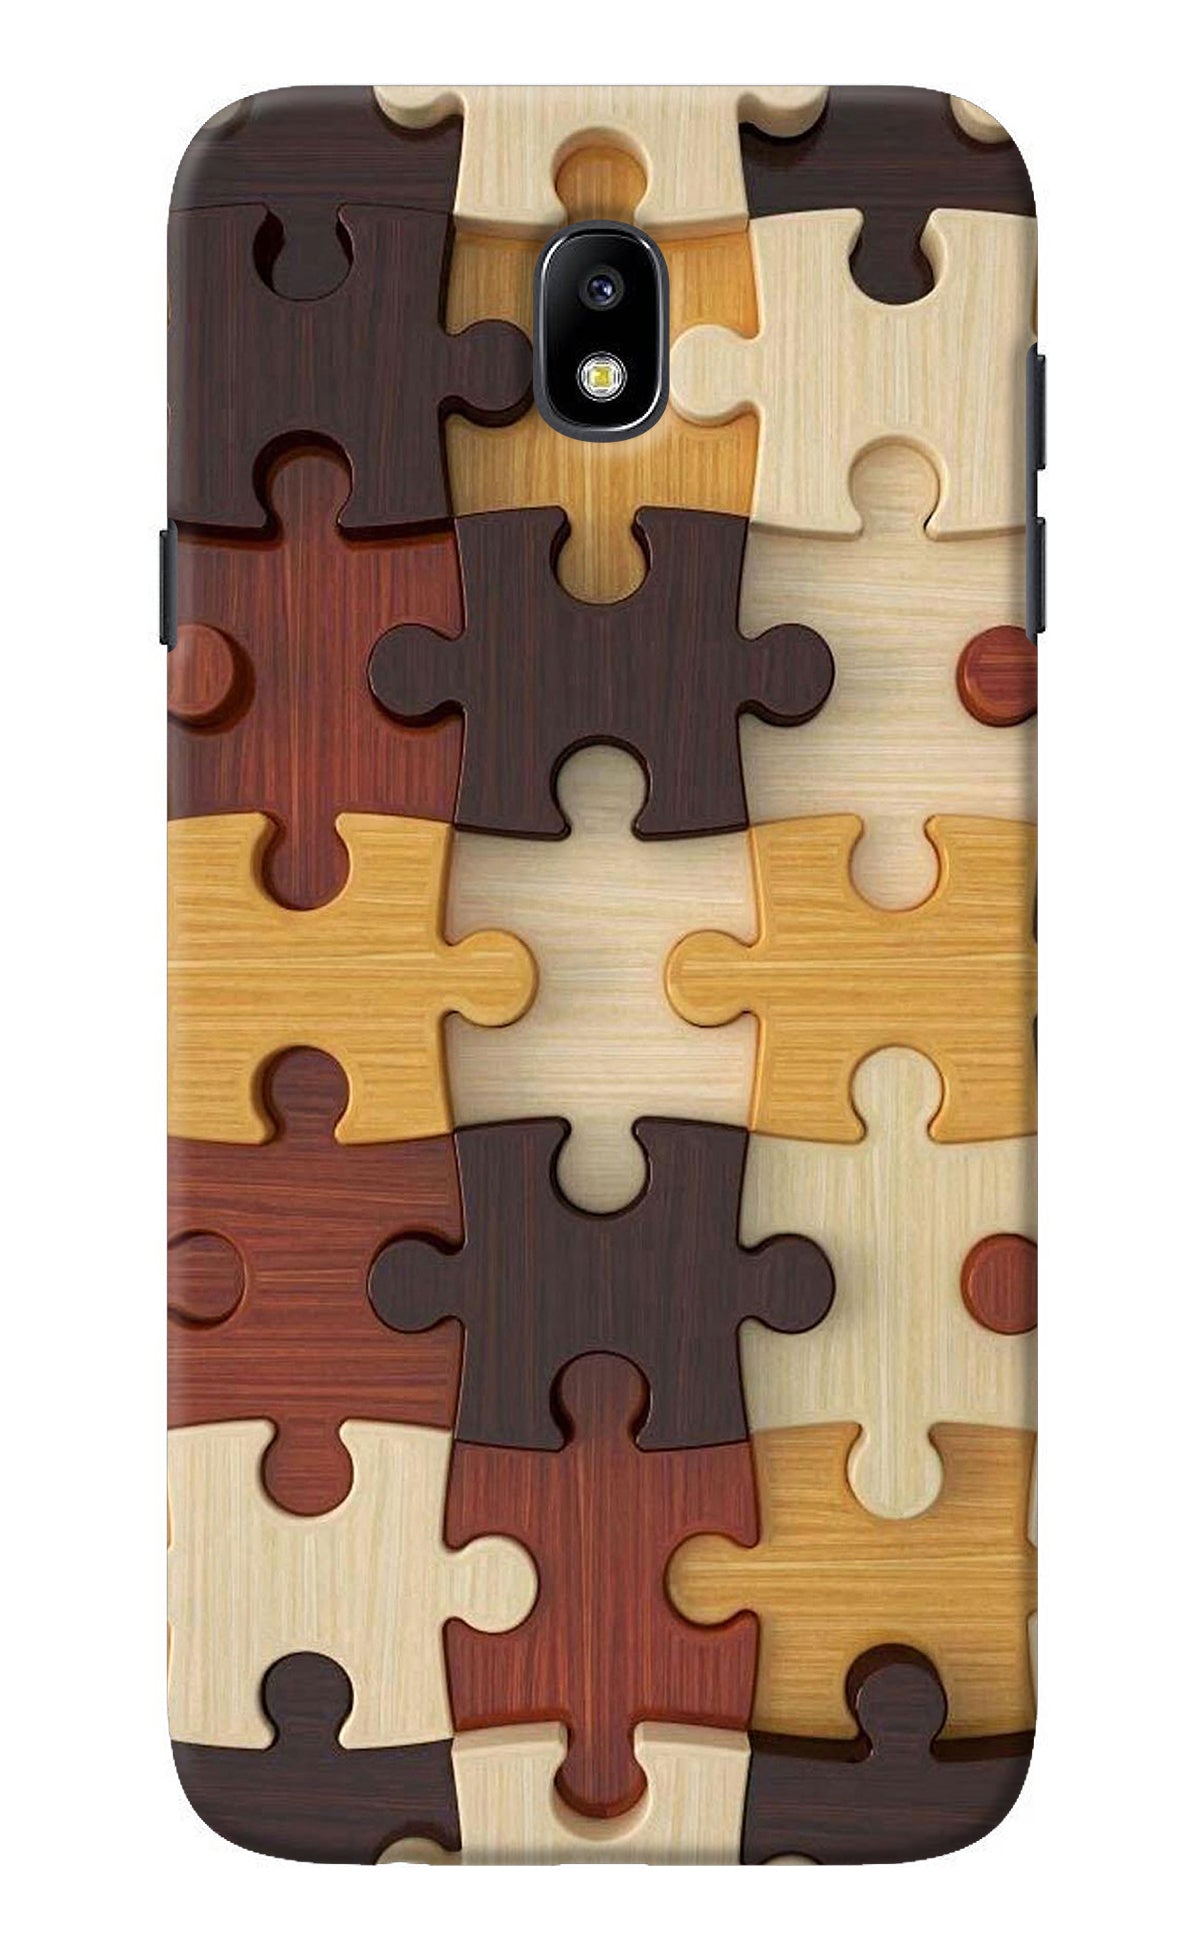 Wooden Puzzle Samsung J7 Pro Back Cover